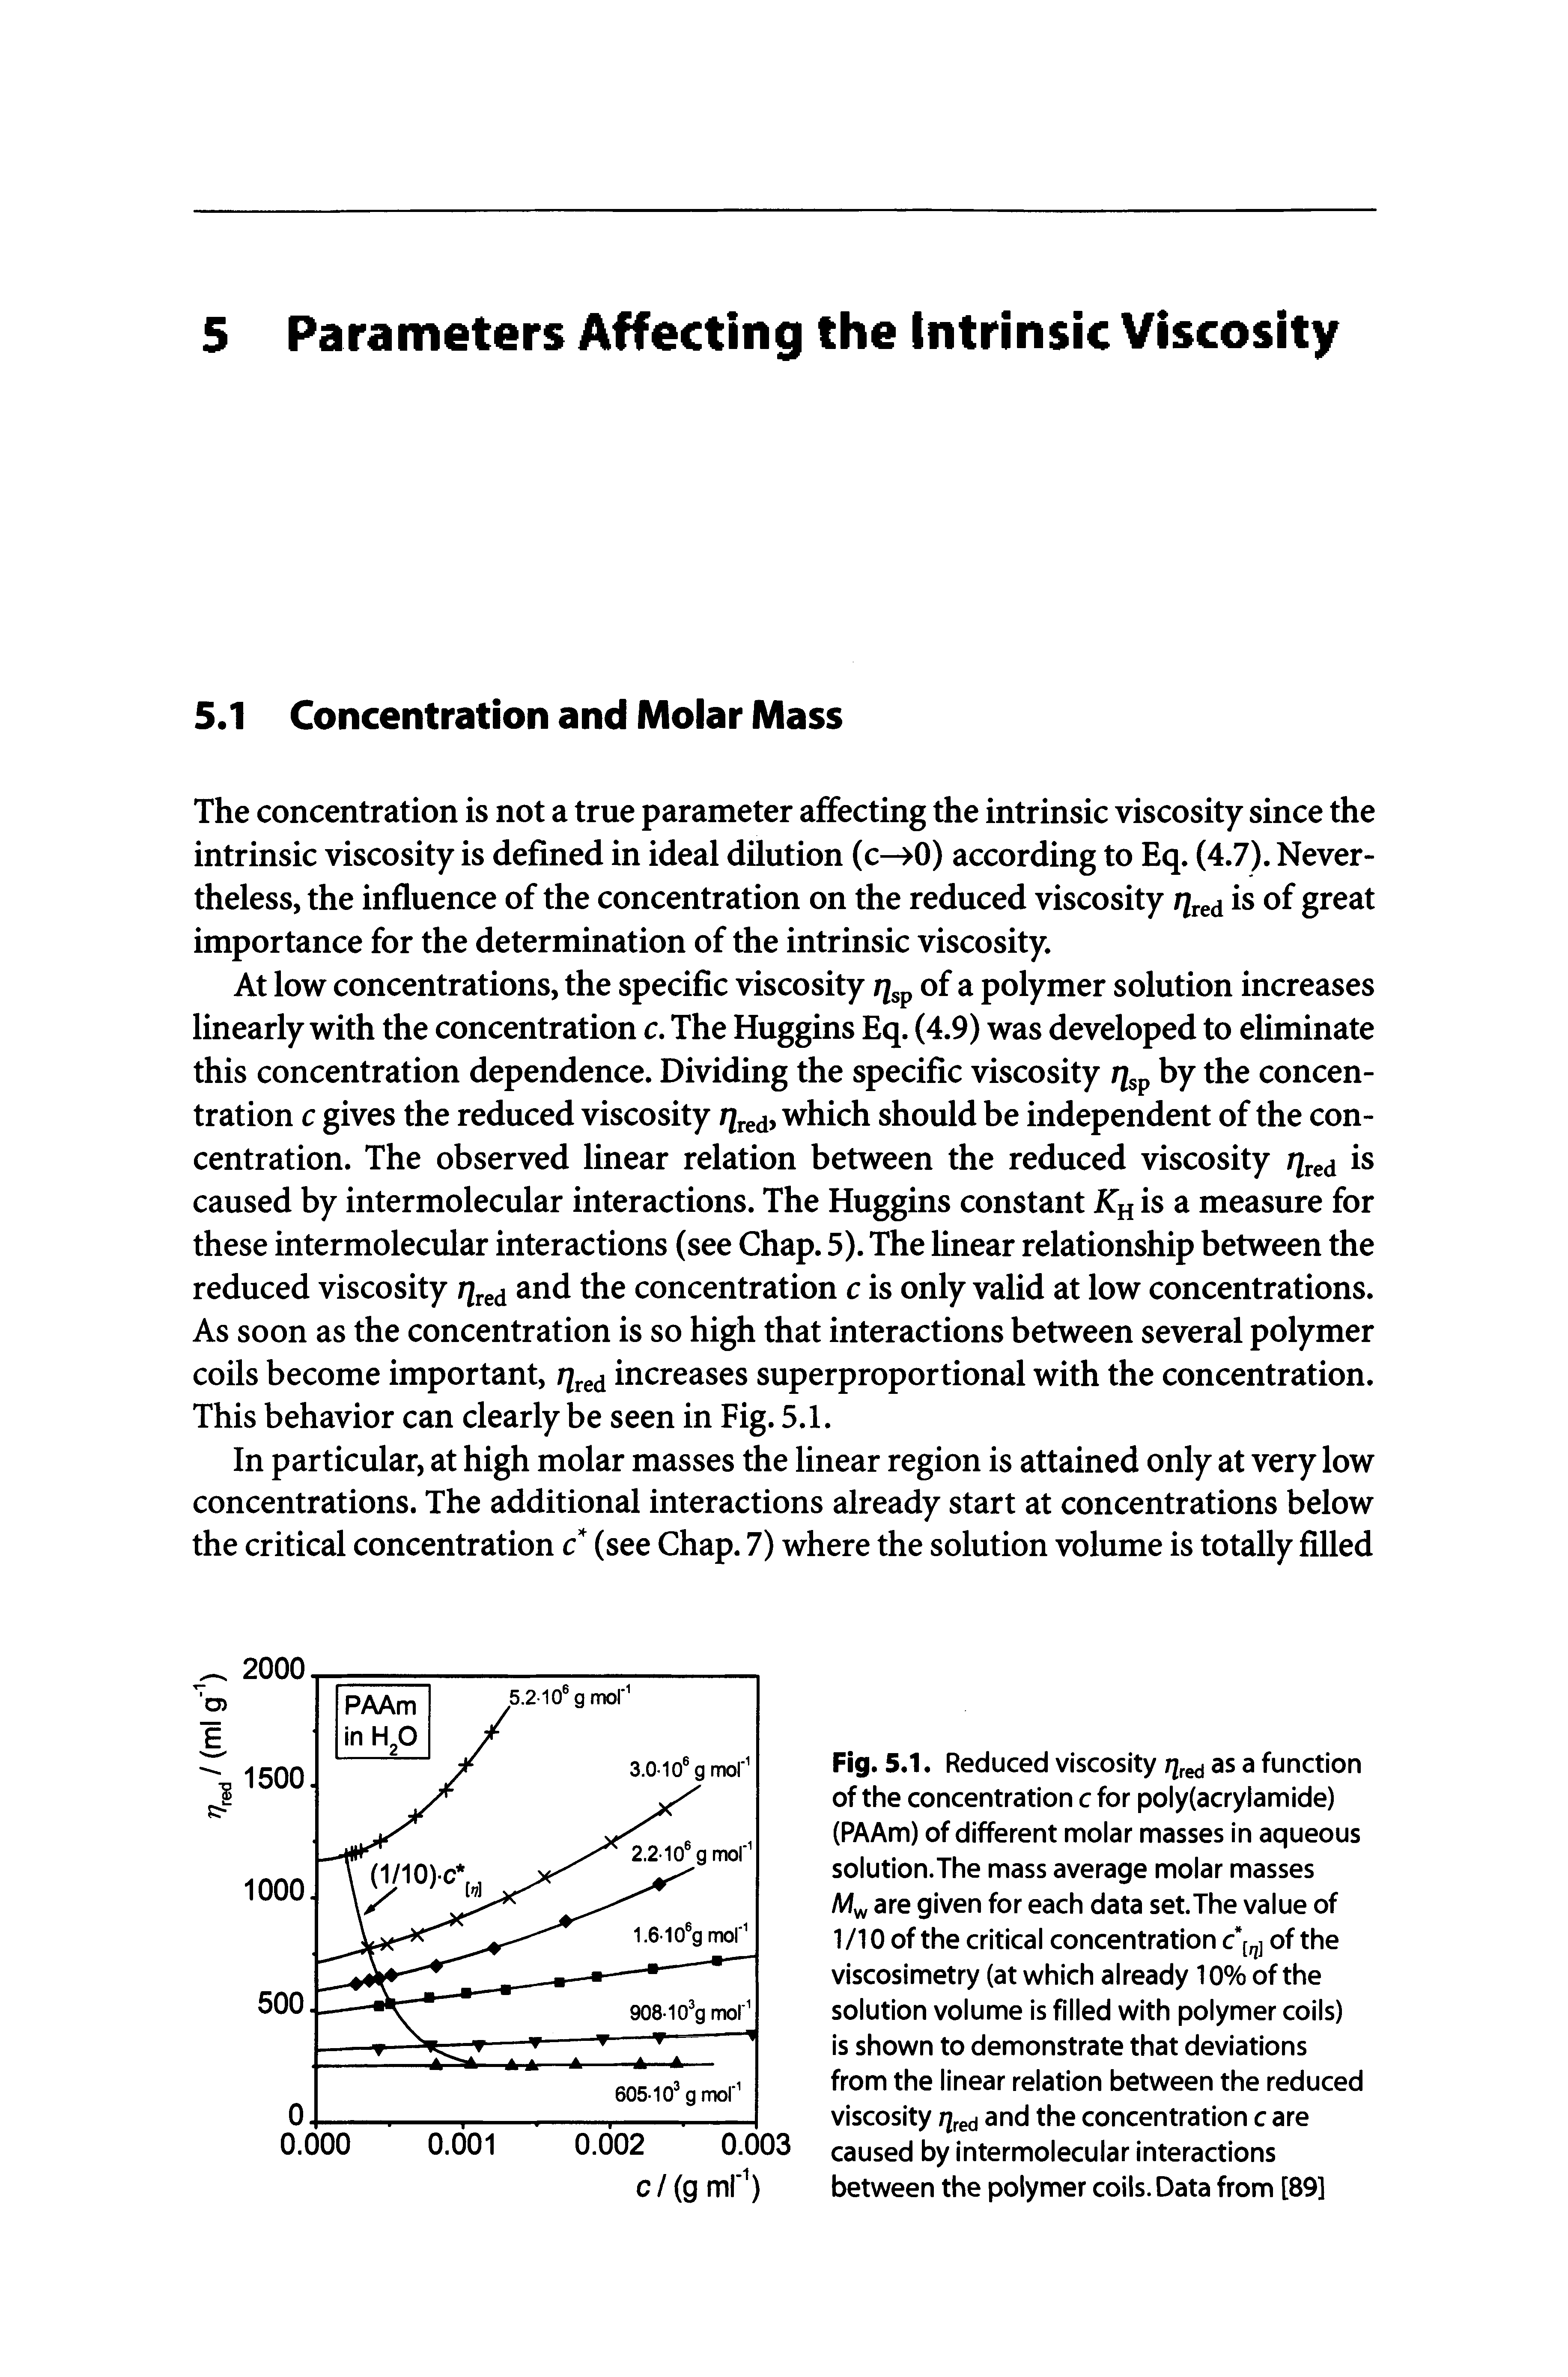 Fig. 5.1. Reduced viscosity /]red as a function of the concentration c for poly(acrylamide) (PAAm) of different molar masses in aqueous solution.The mass average molar masses Mw are given for each data set.The value of 1/10 of the critical concentration c i] of the viscosimetry (at which already 10% of the solution volume is filled with polymer coils) is shown to demonstrate that deviations from the linear relation between the reduced viscosity / red and the concentration c are caused by intermolecular interactions between the polymer coils. Data from [89]...